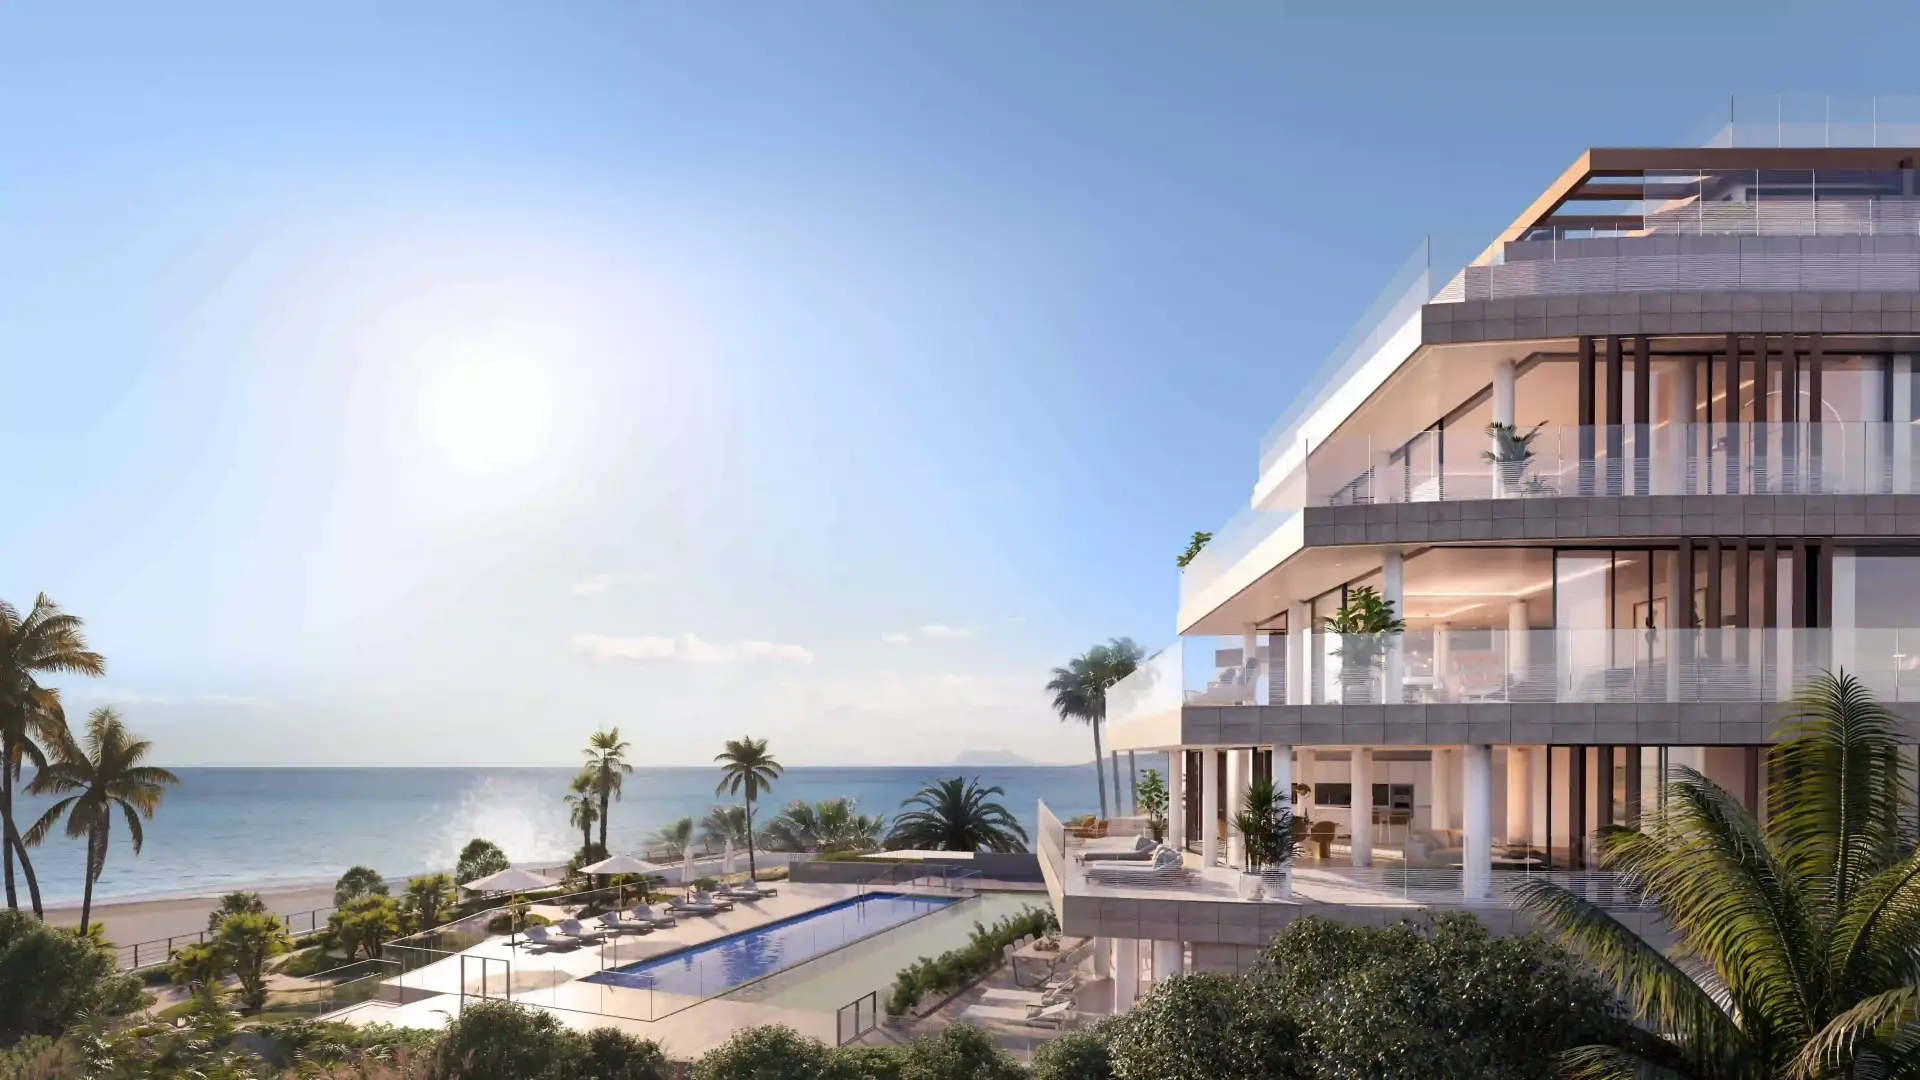 A beachfront development of great exclusivity, located in Estepona, where only14 luxury homes and a unique lifestyle are on offer.